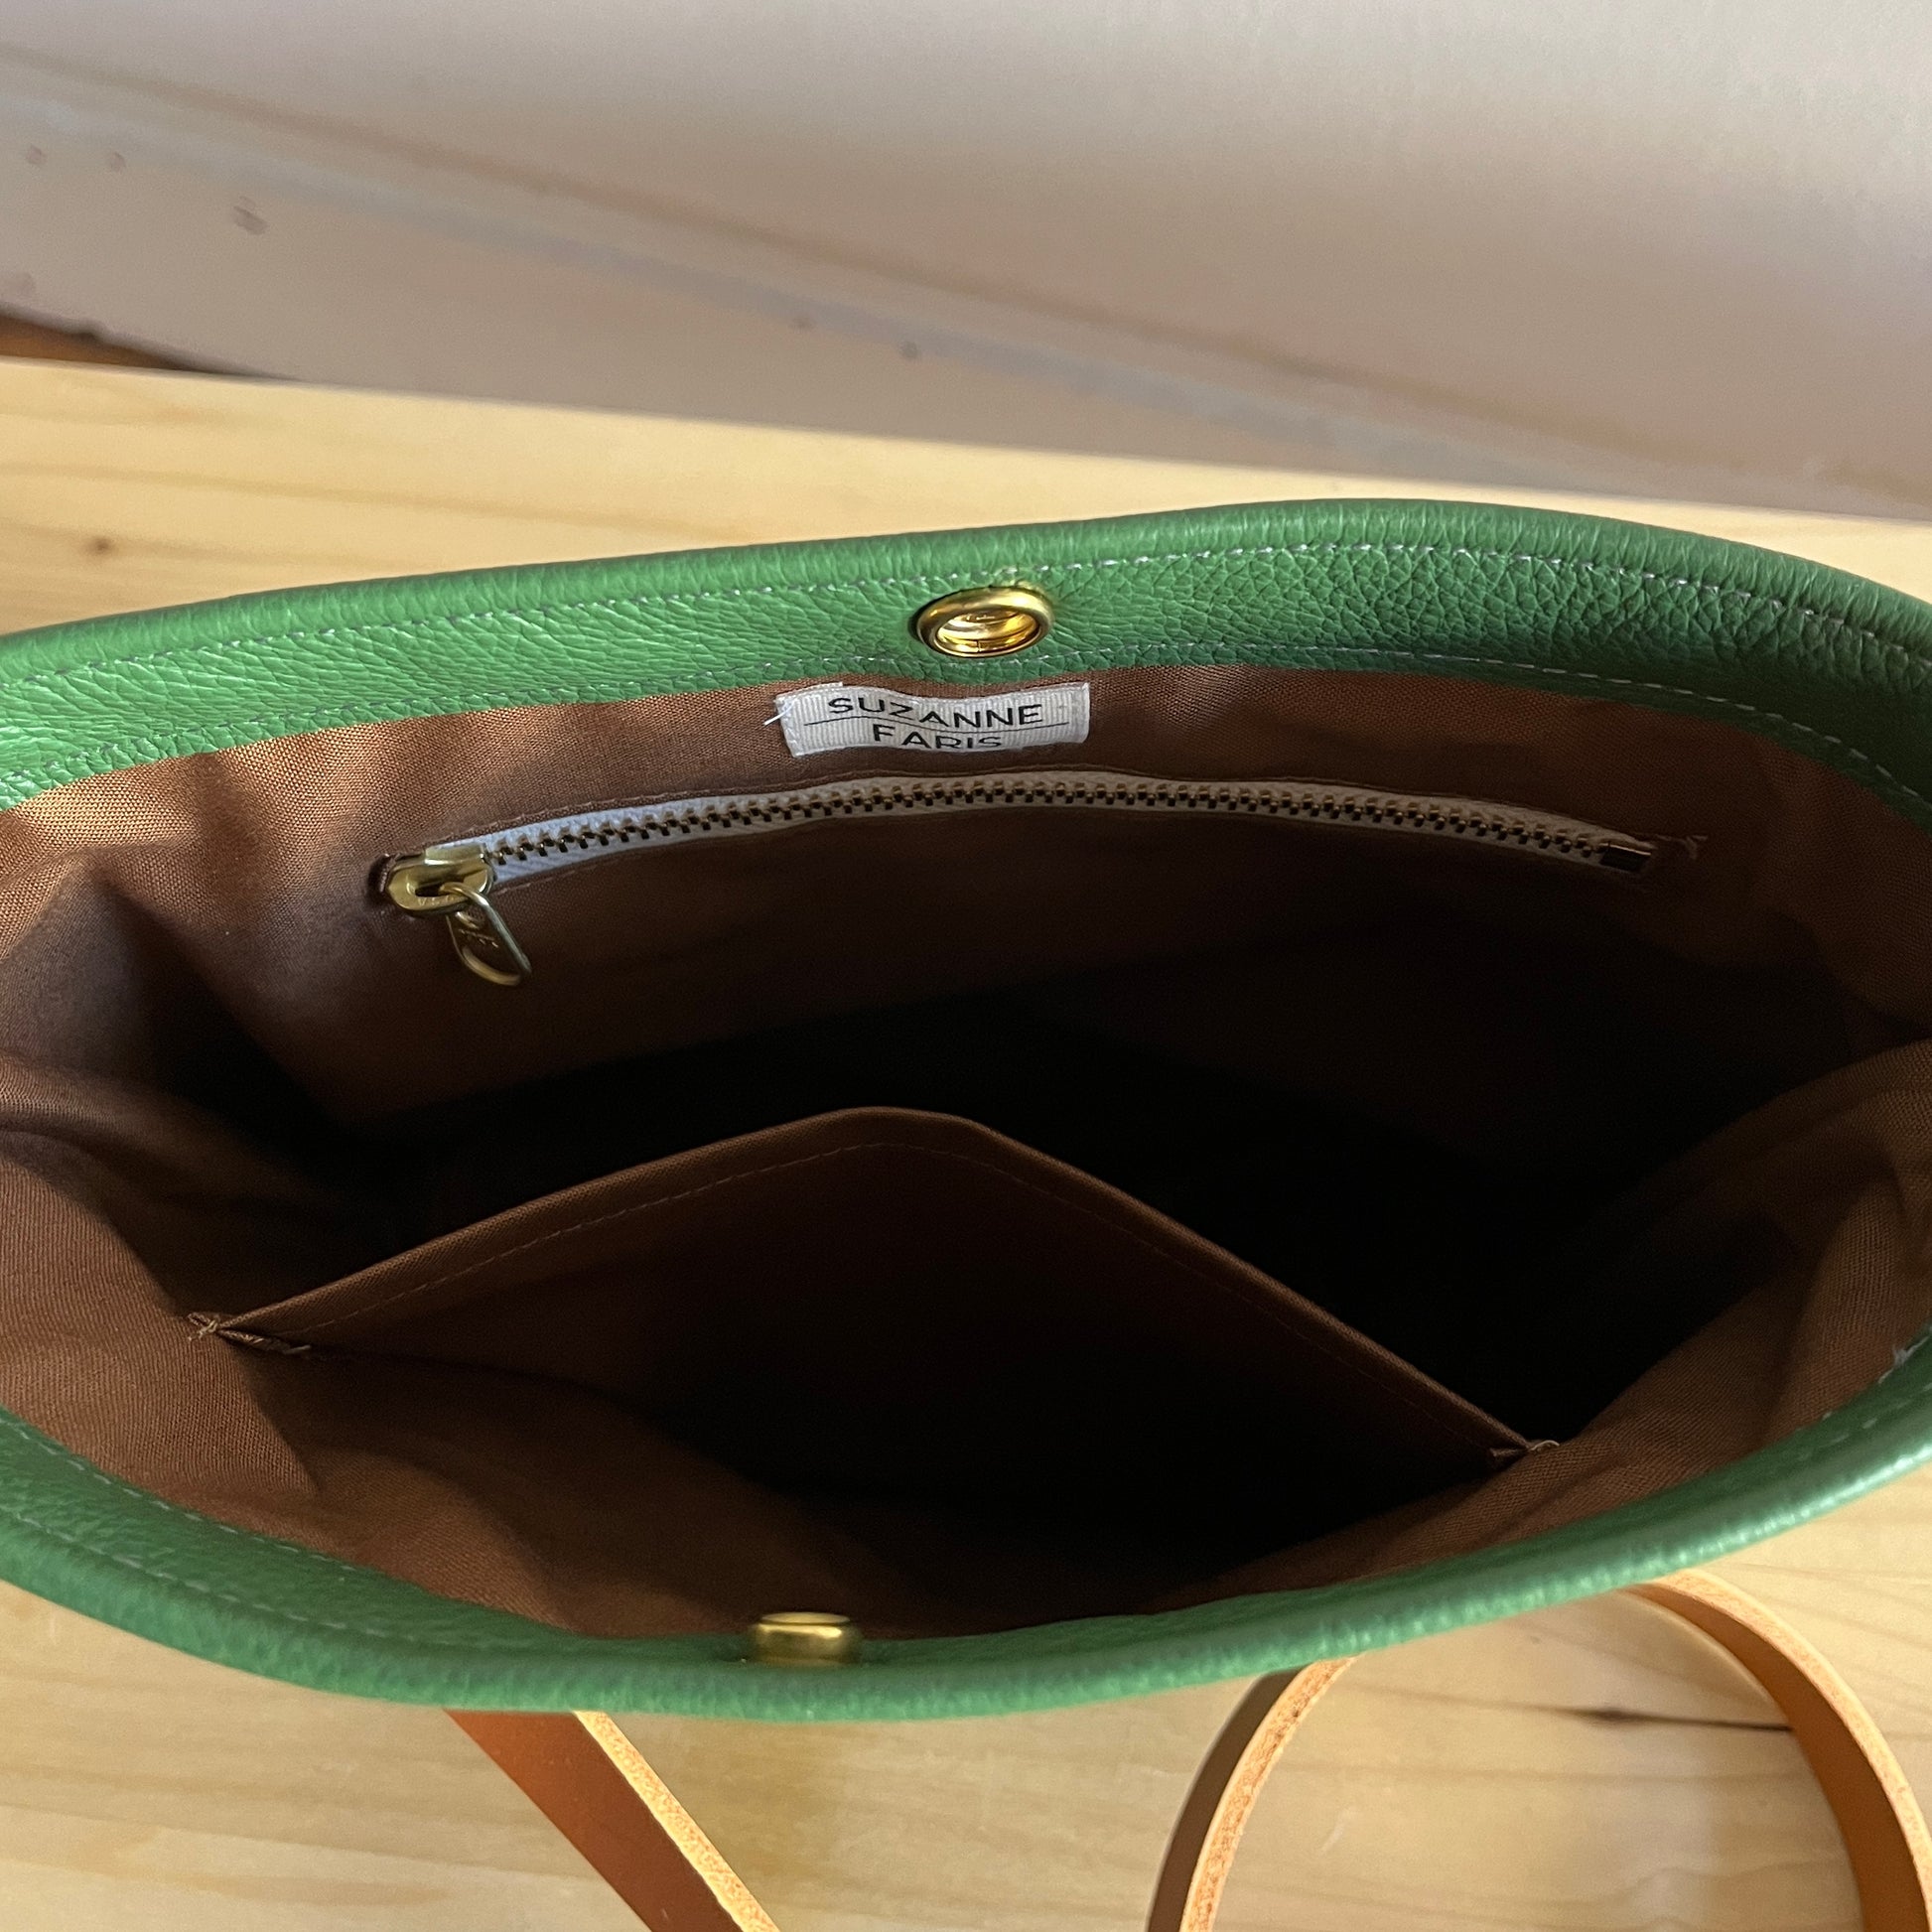 brown leather interior on moss green leather bag